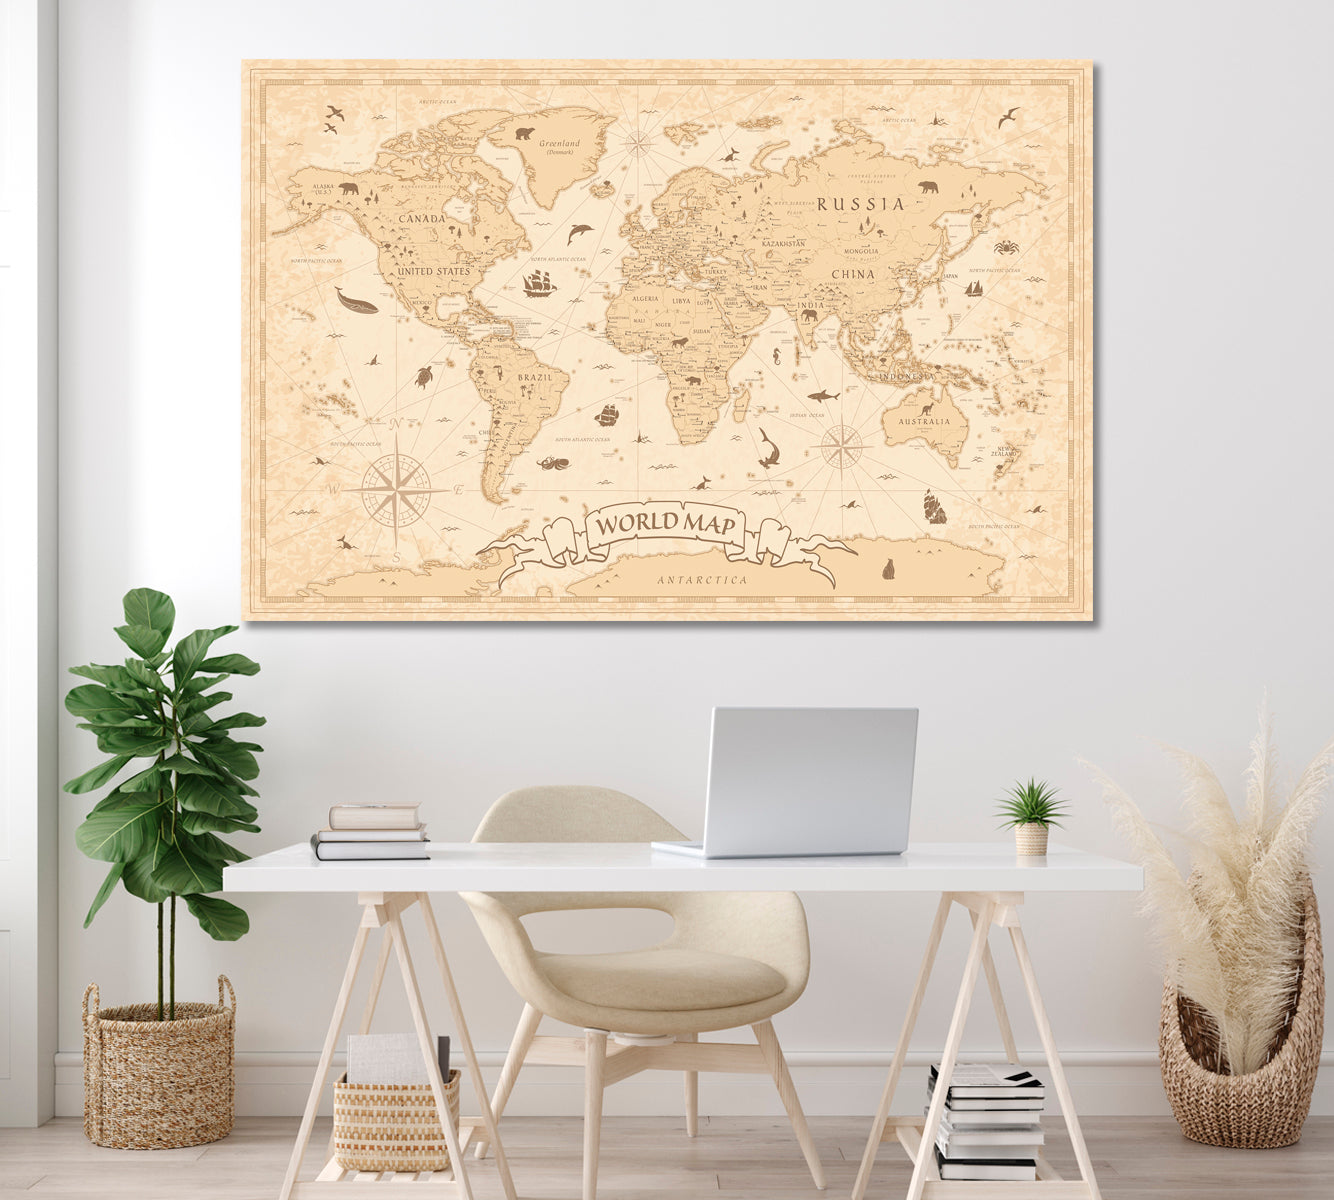 Vintage World Map Canvas Print ArtLexy 1 Panel 24"x16" inches 